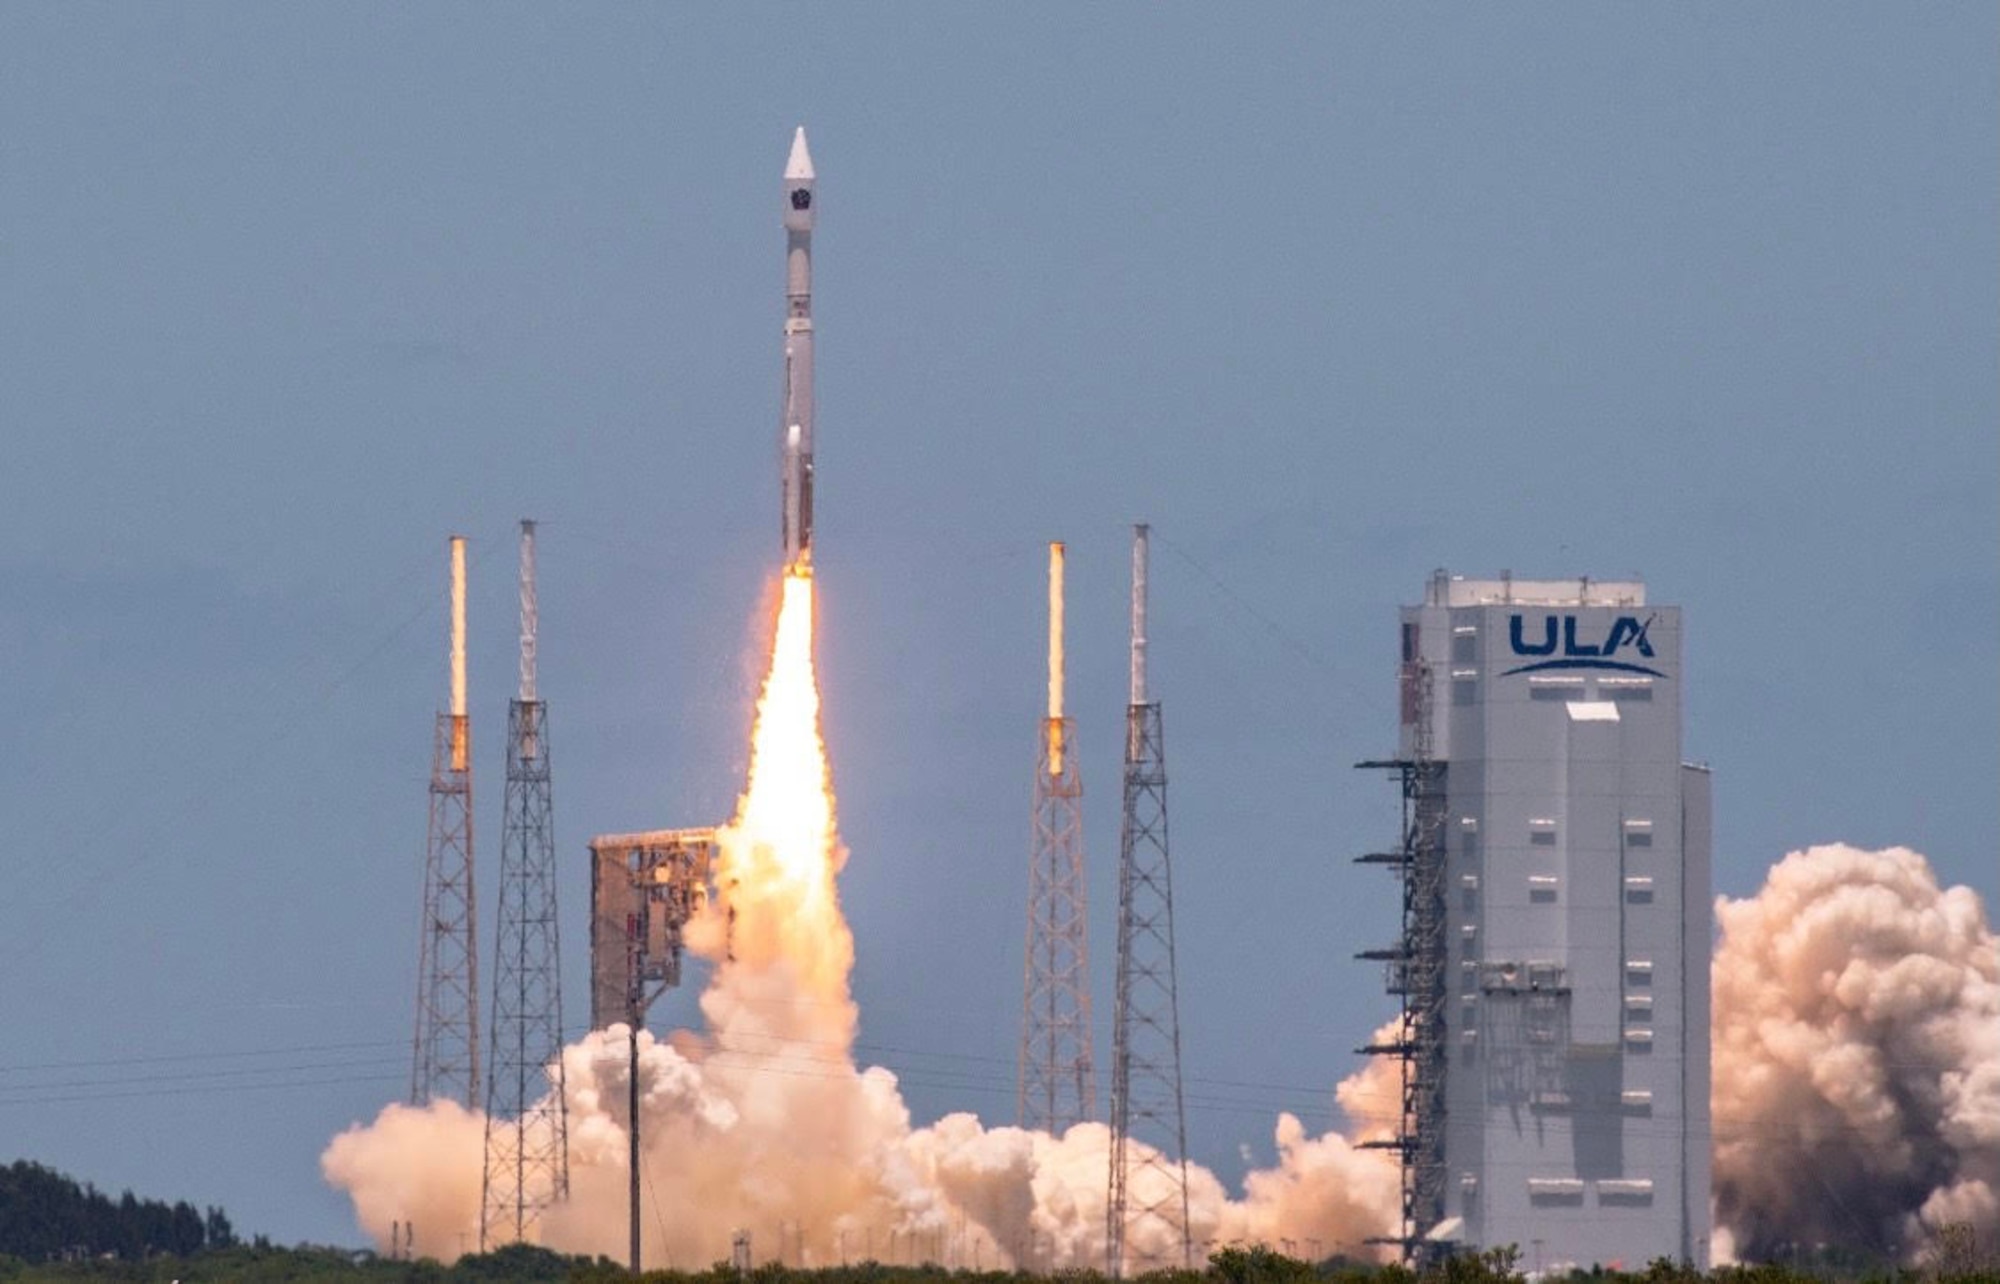 The U.S. Space Force successfully launched the fifth Space Based Infrared System Geosynchronous Earth Orbit satellite on an Atlas V launch vehicle from Space Launch Complex 41 at Cape Canaveral Space Force Station, Florida, May 18, at 1:37 p.m. (Courtesy Photo)